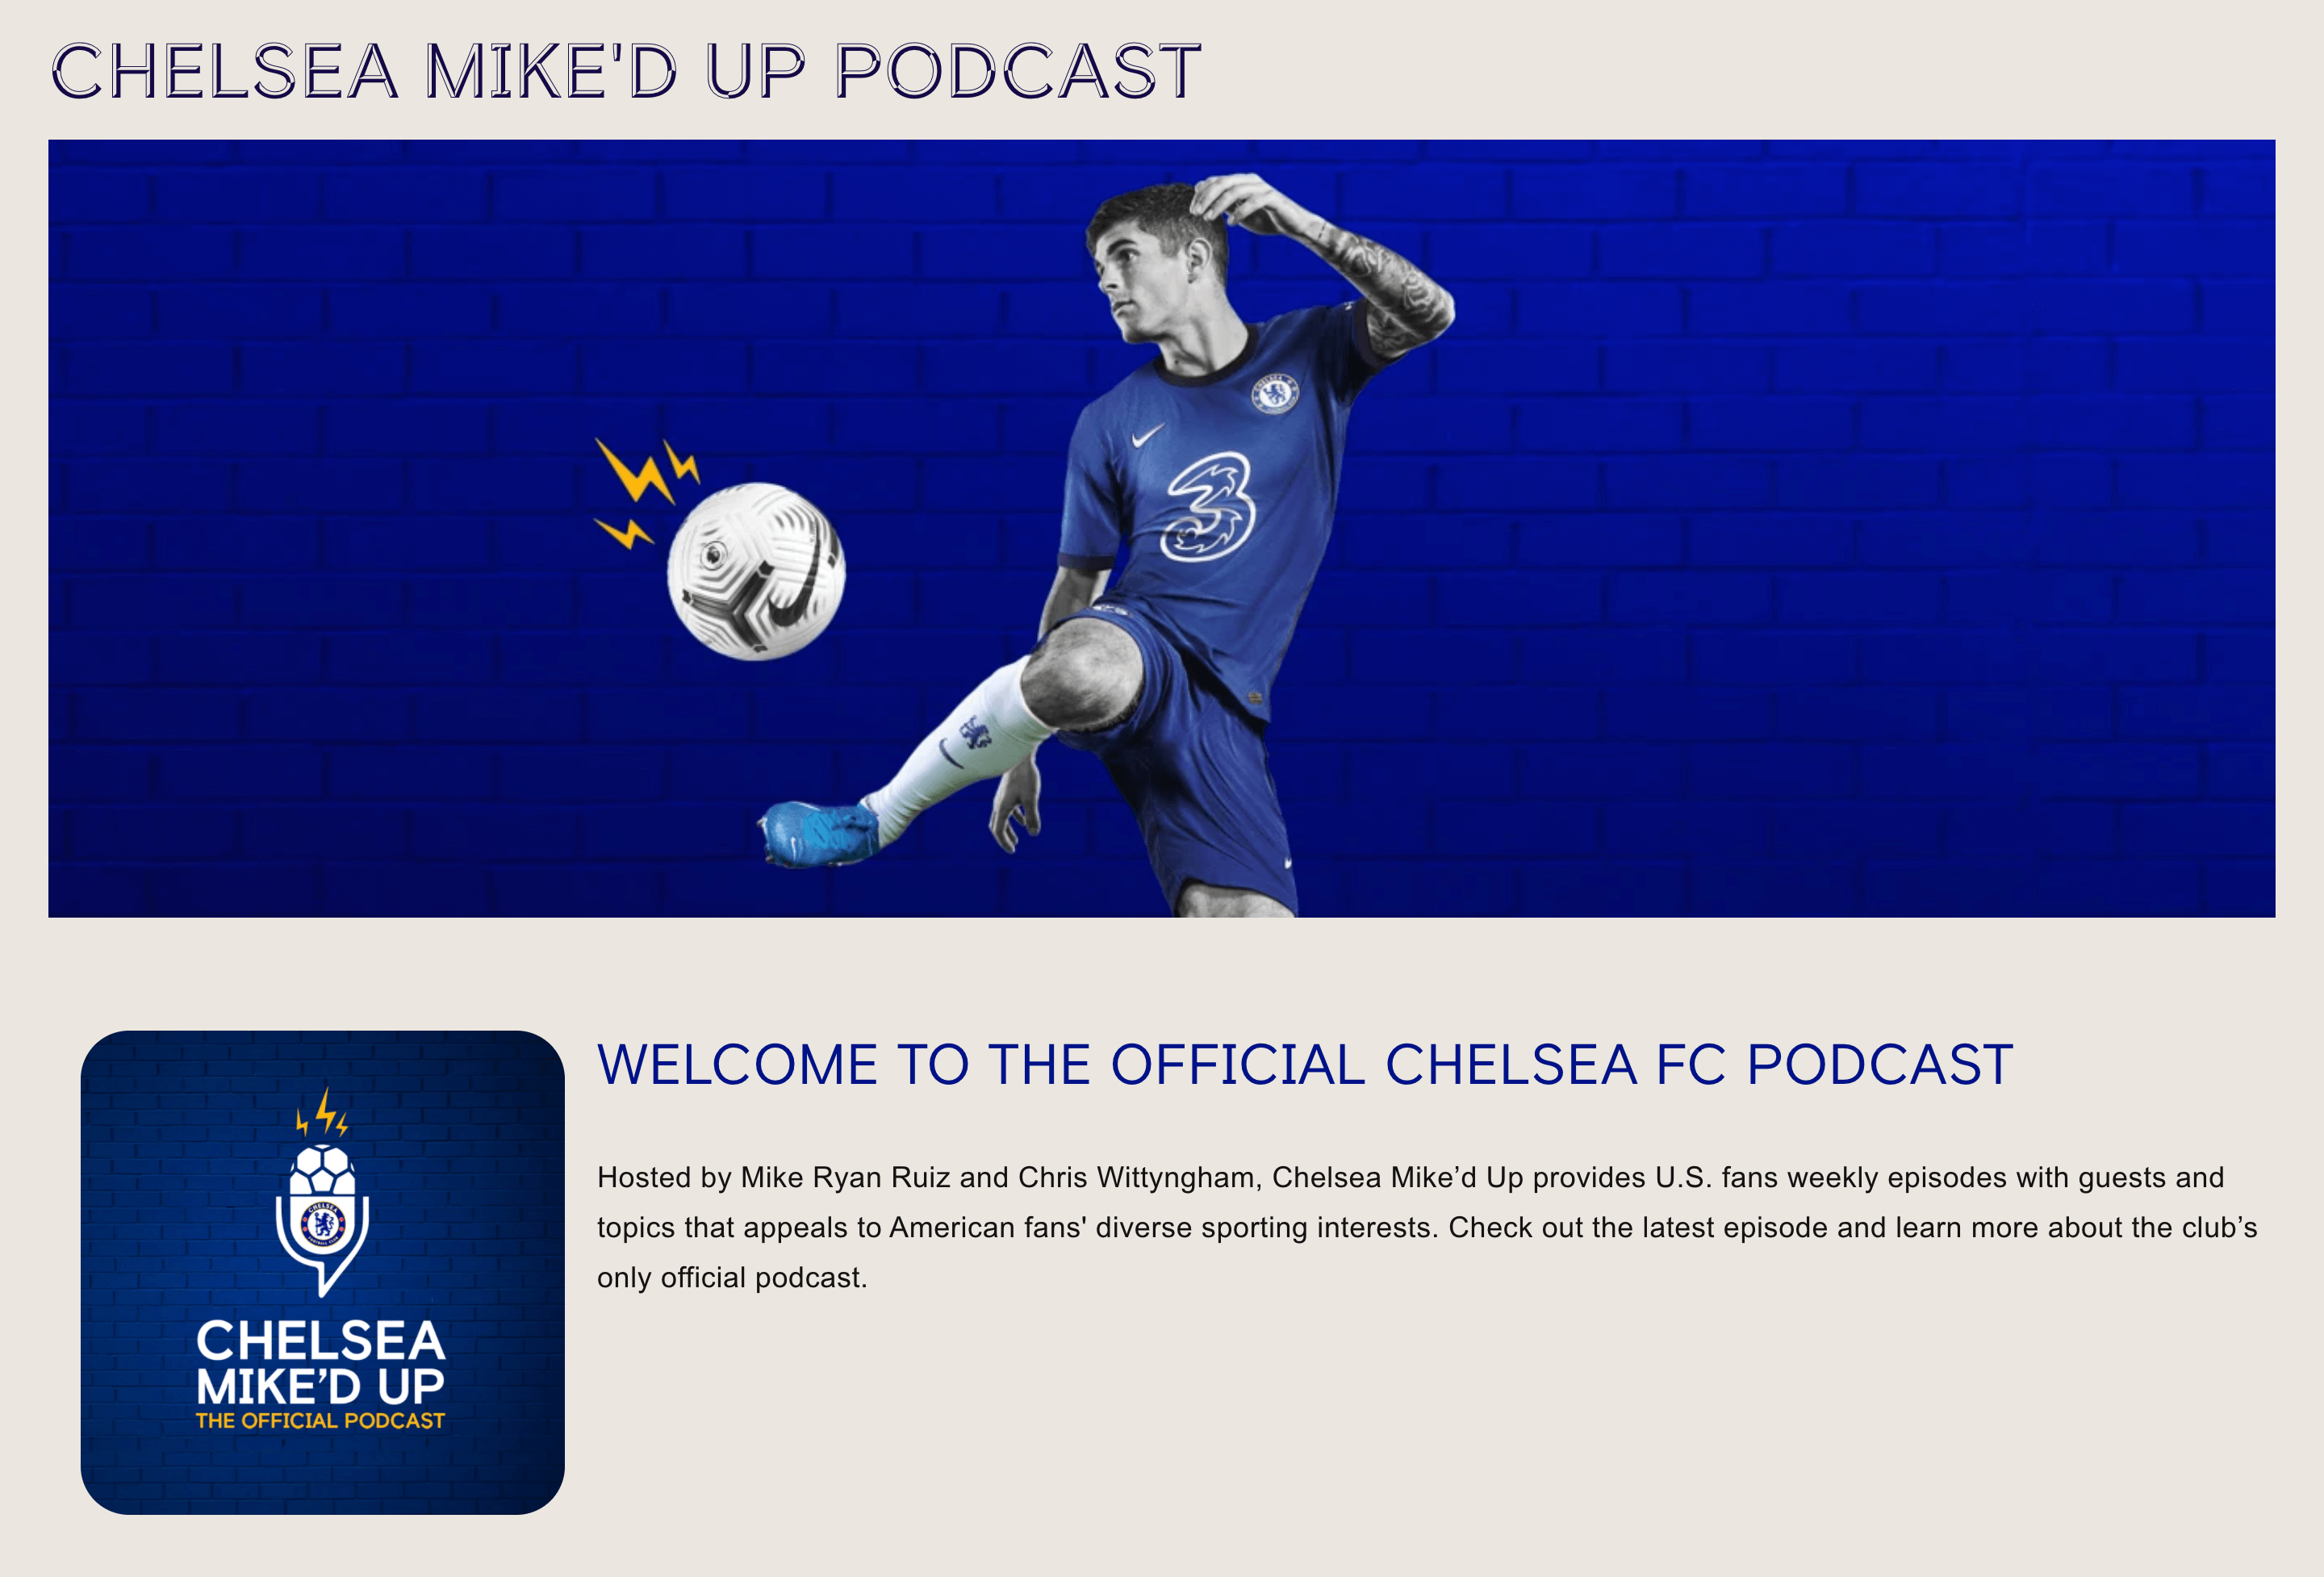 Chelsea Miked Up Podcast